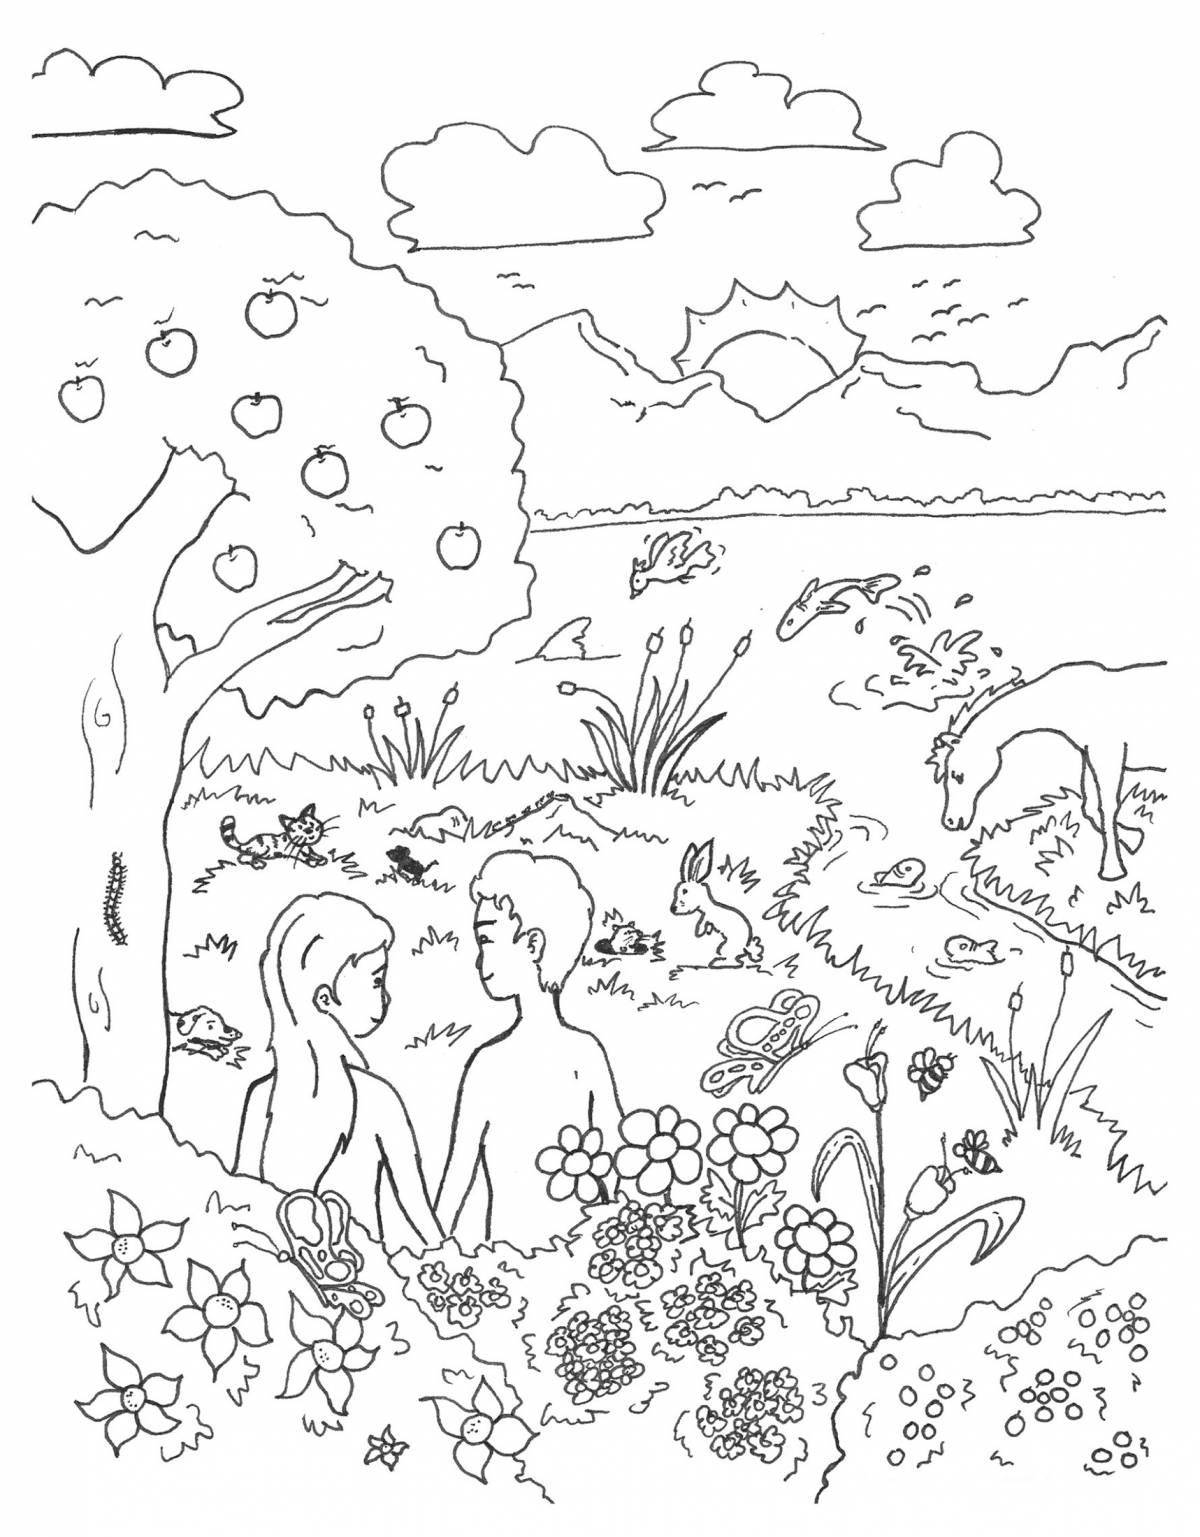 Colorful imagination coloring create a coloring book